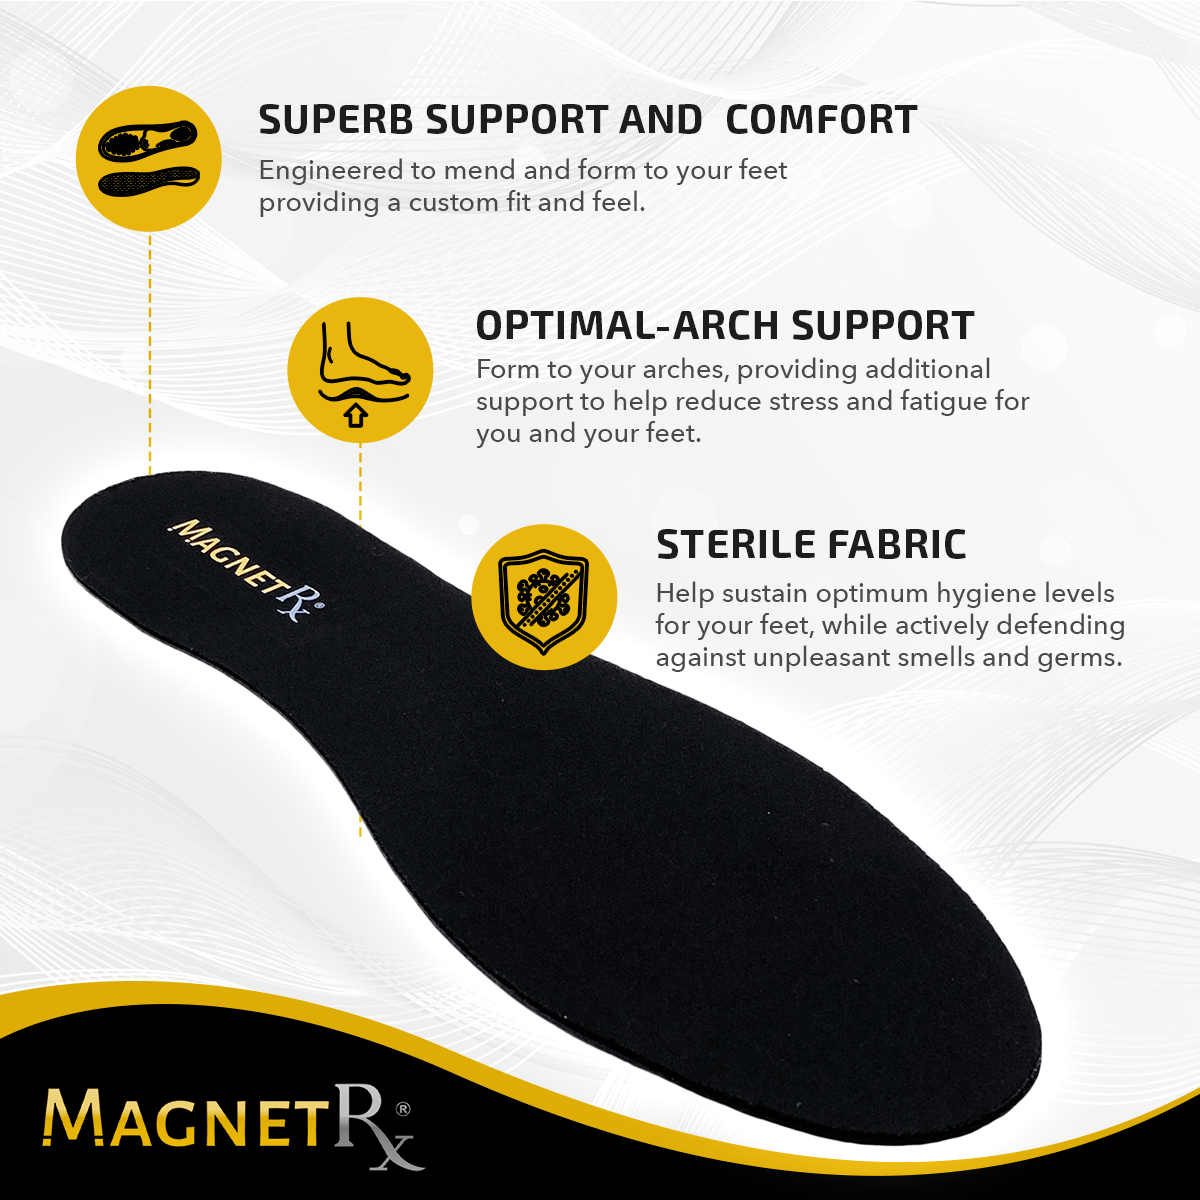 Magnetic Insoles Magnetic Insoles Foot Shoe Inserts with Magnetic Therapy MagnetRX